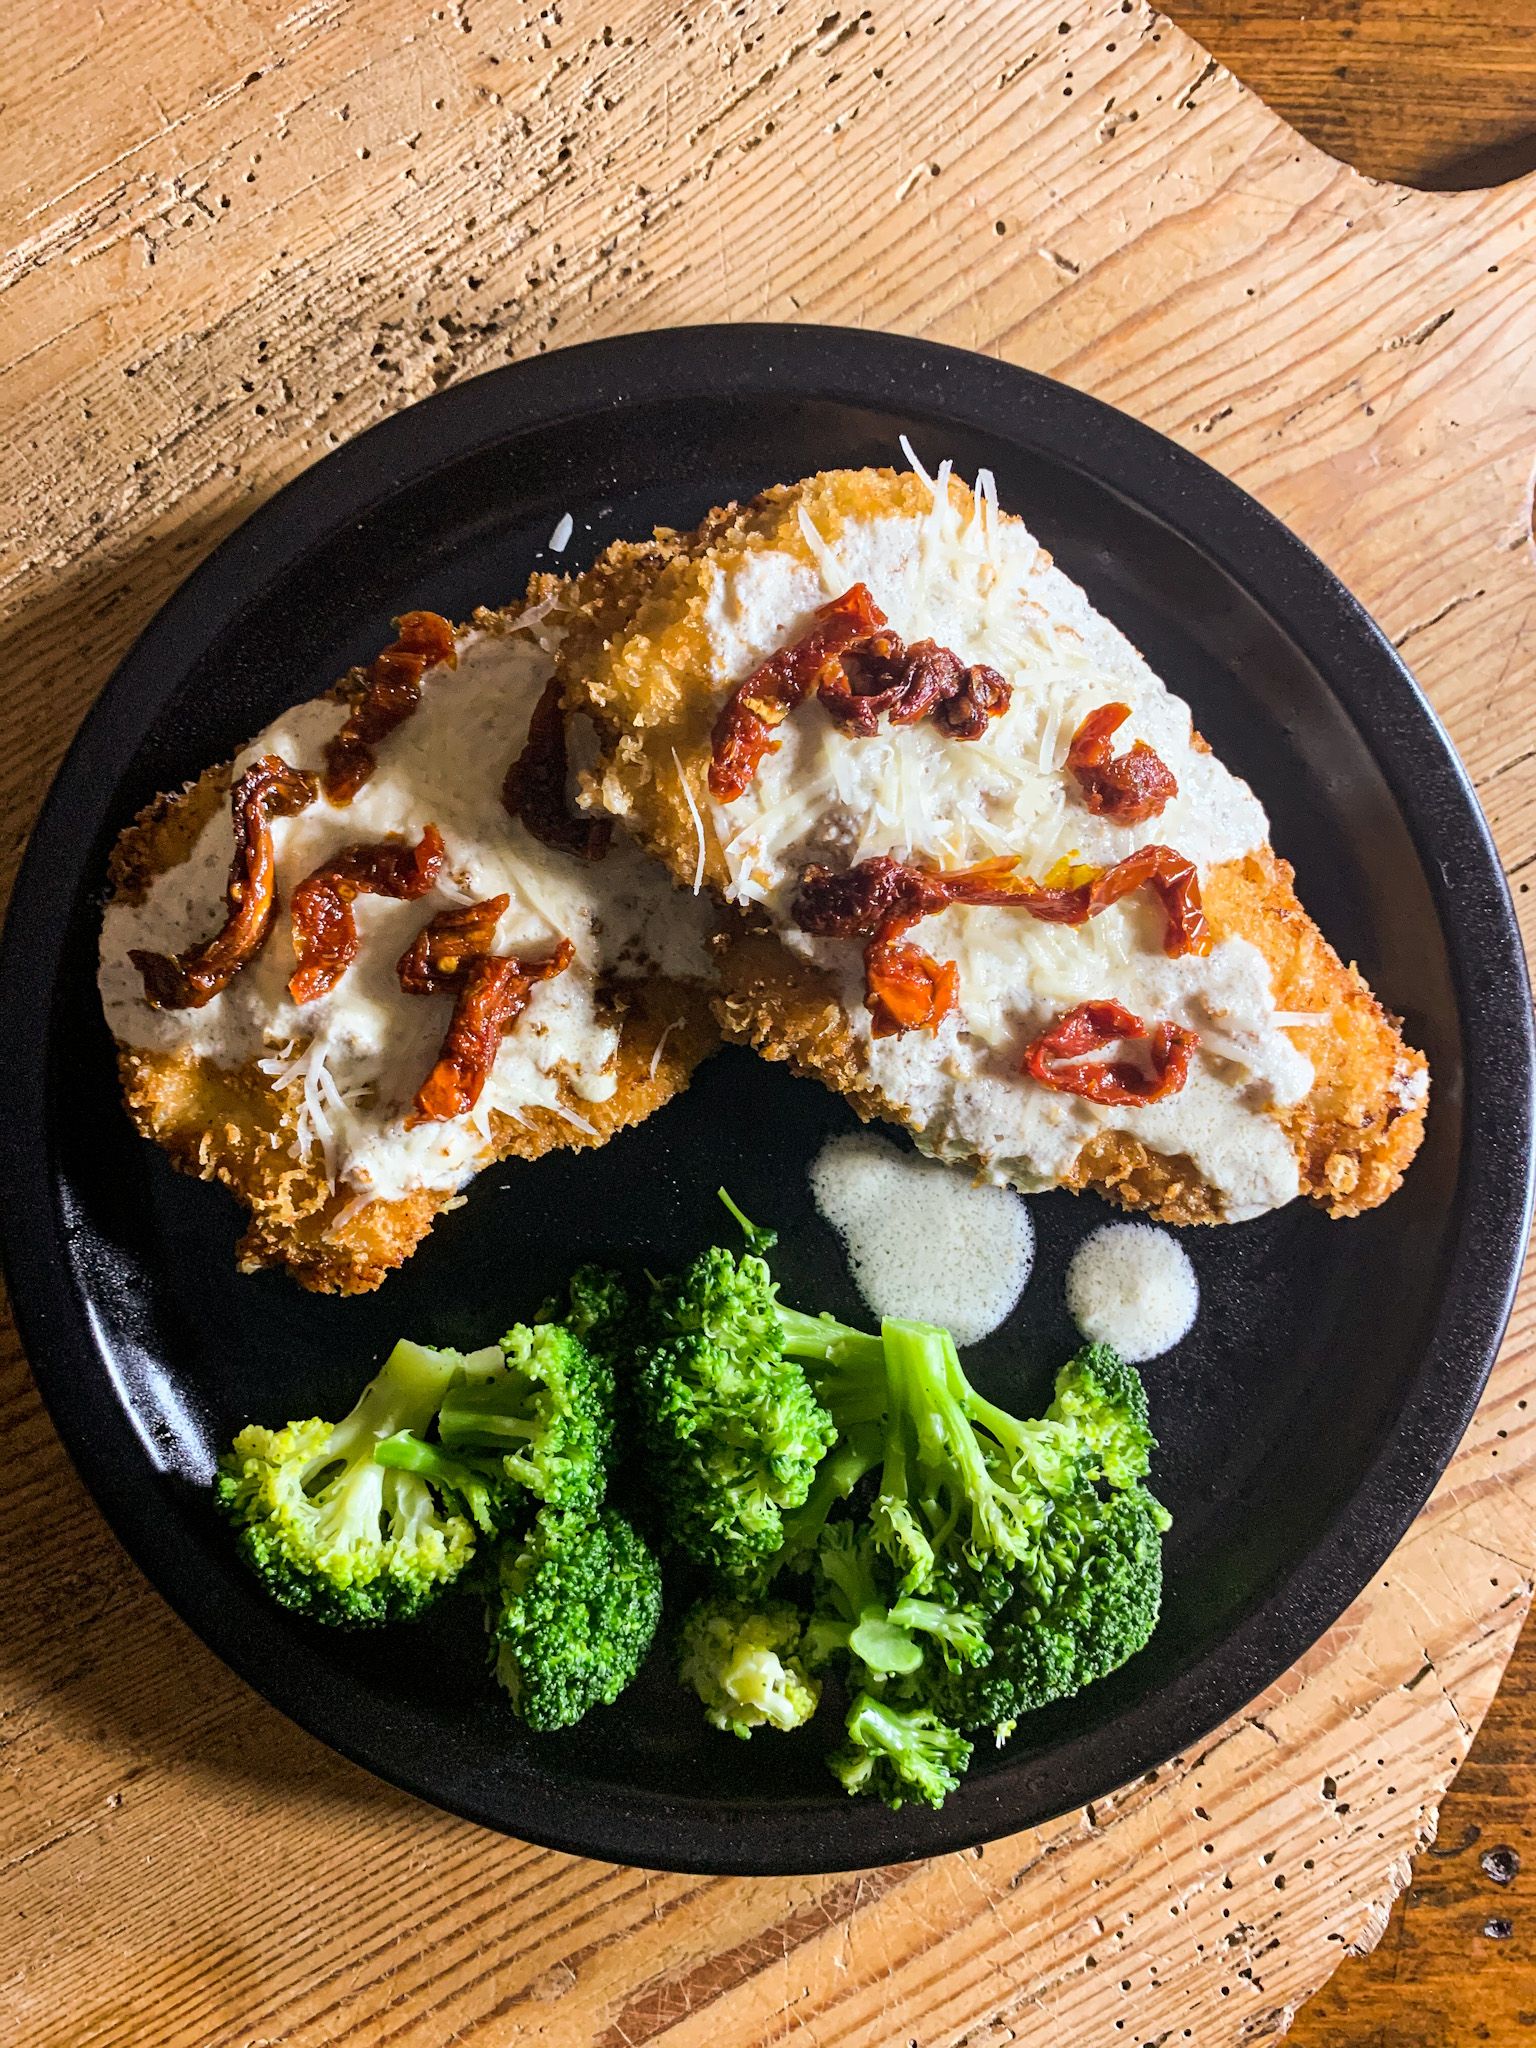 Bj's Parmesan Crusted Chicken Recipe